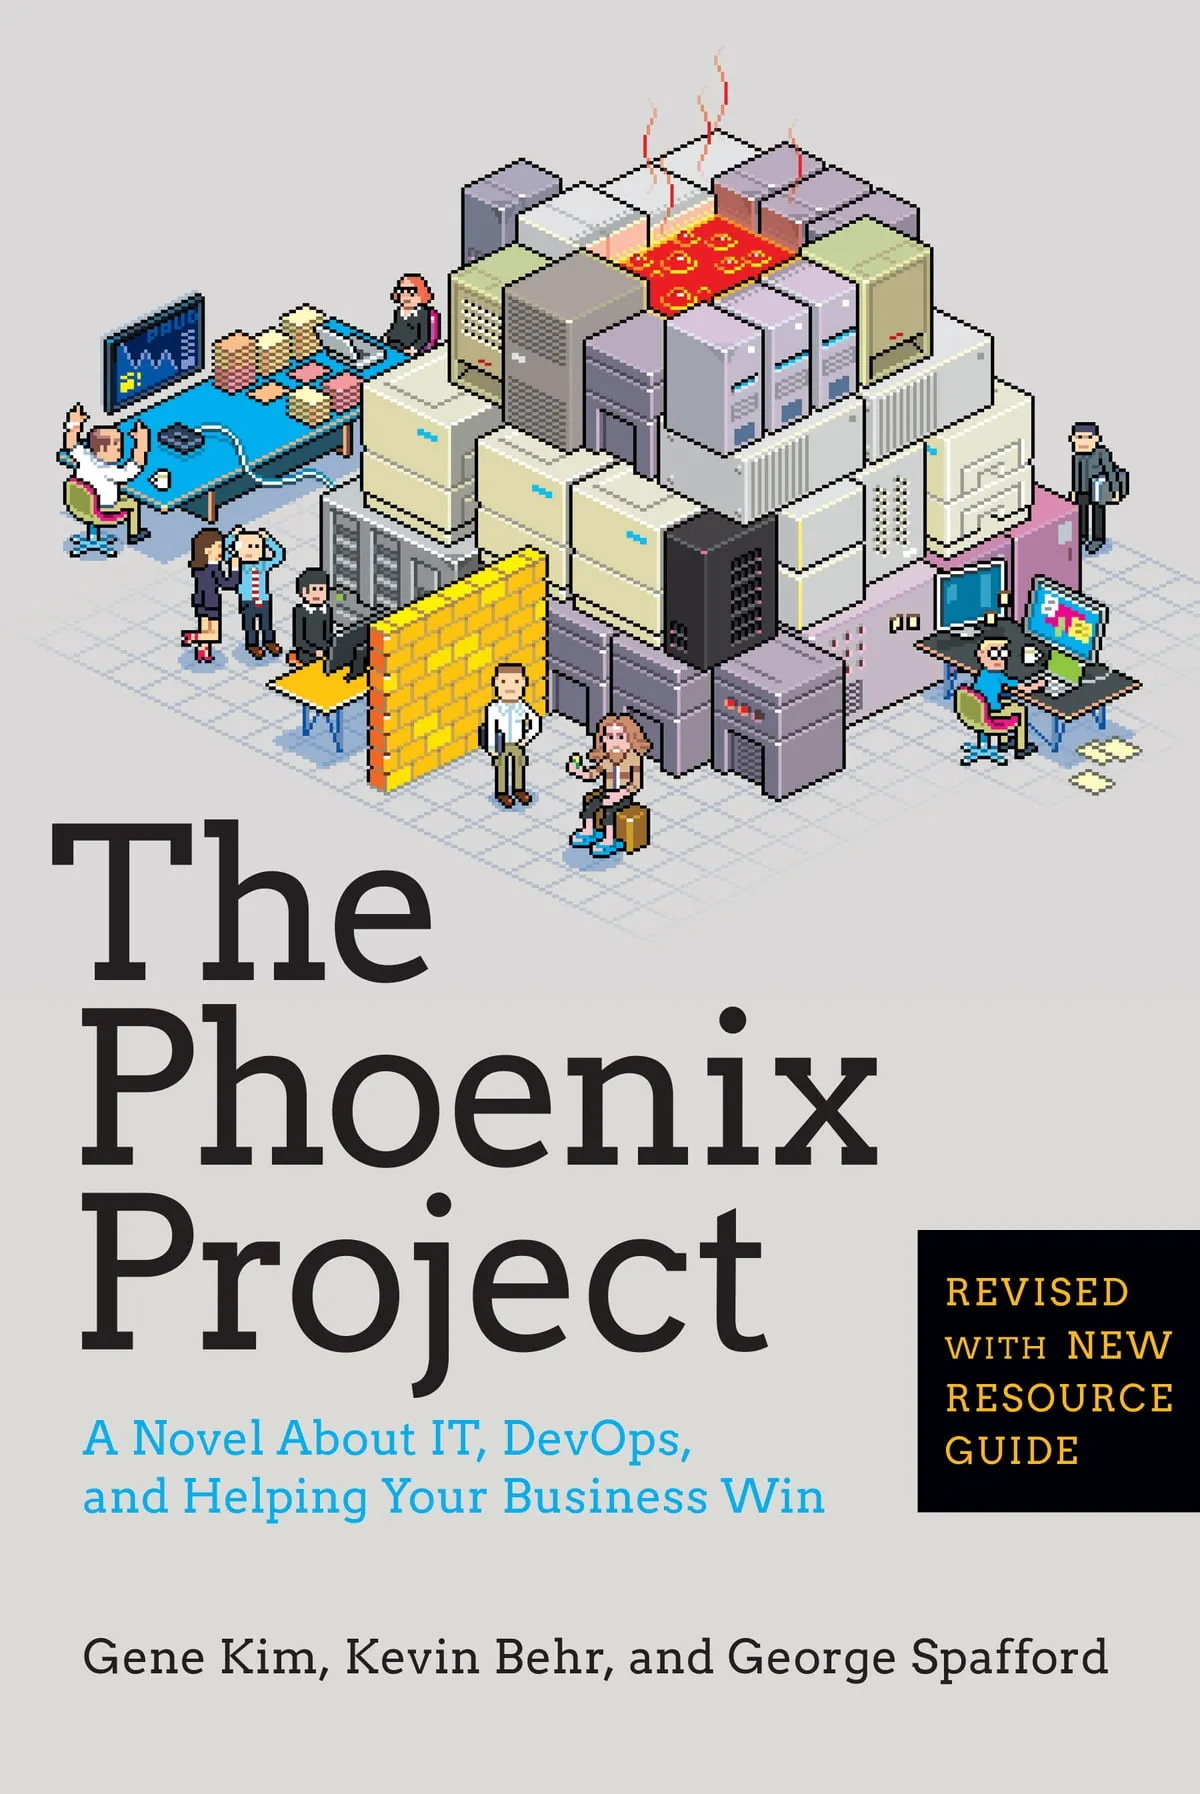 Cover of the book title The Phoenix Project